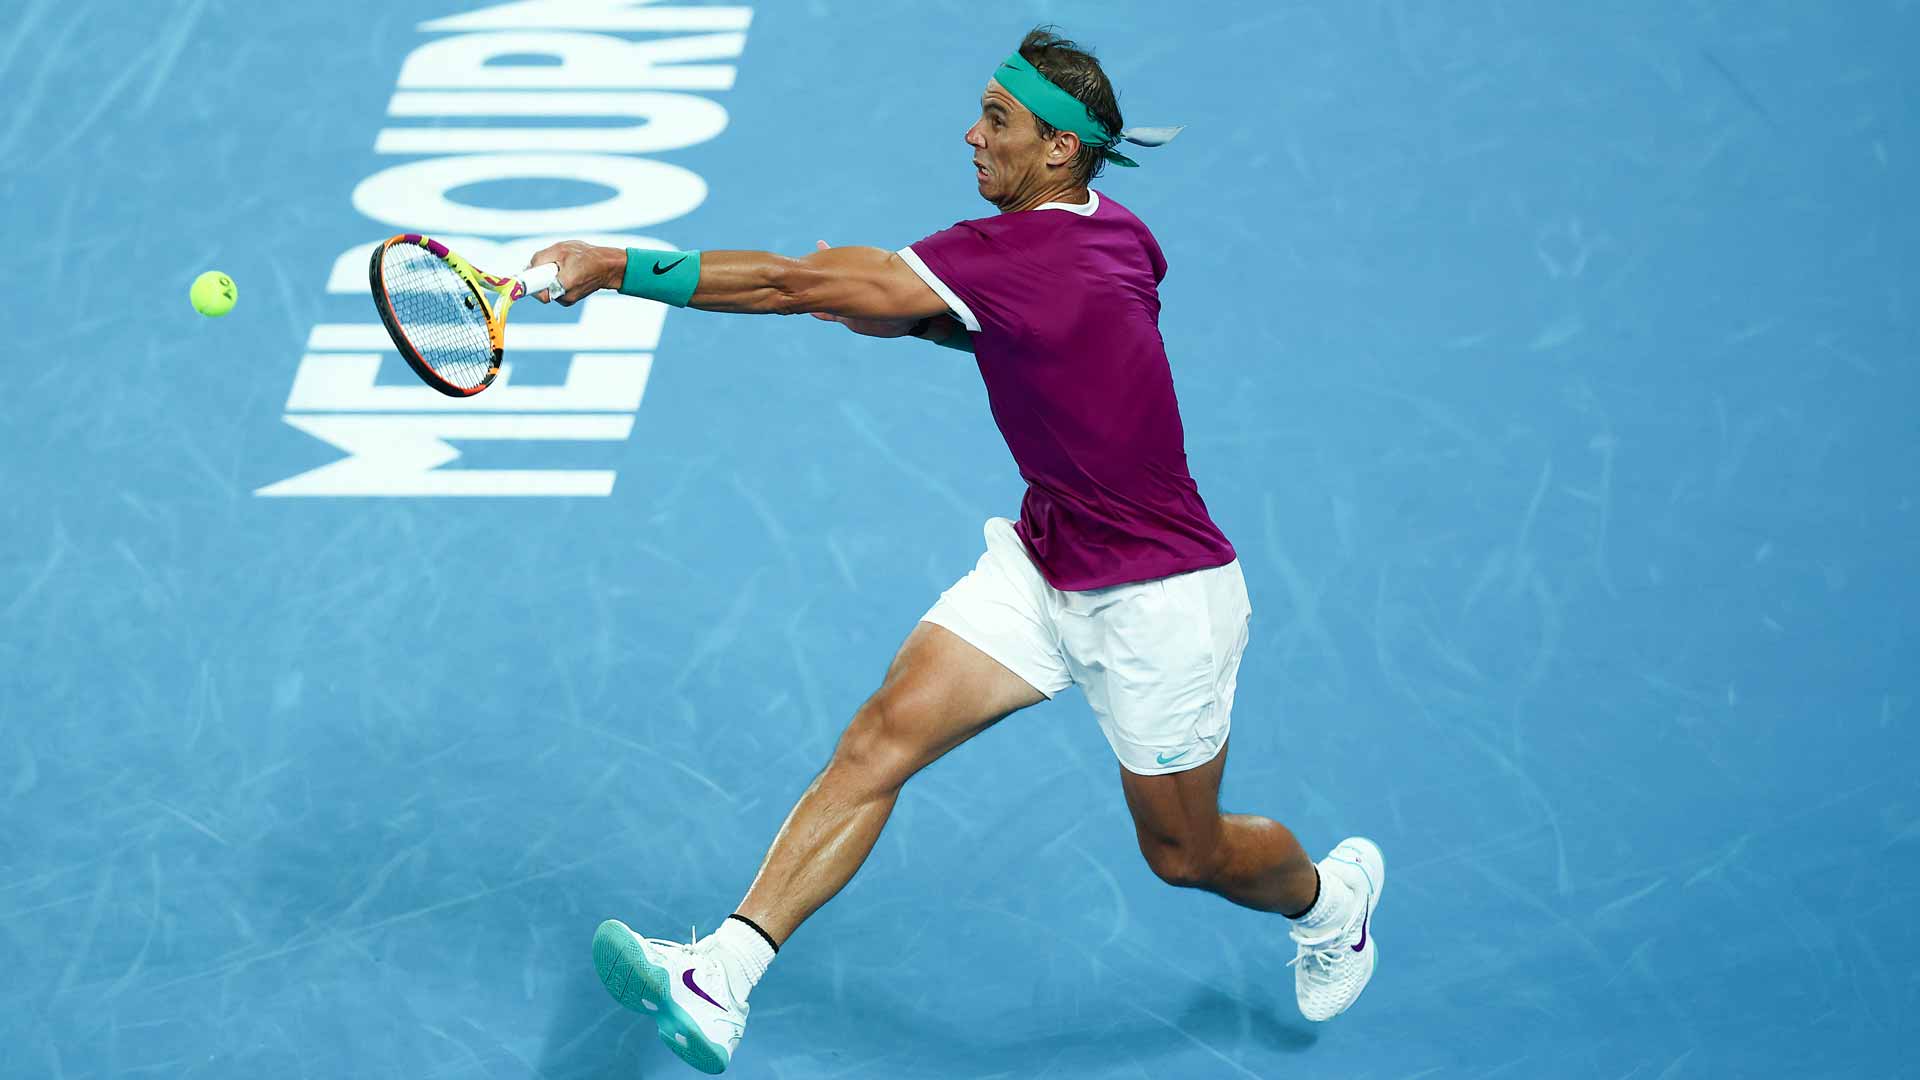 Rafael Nadal in action during the 2022 Australian Open final.